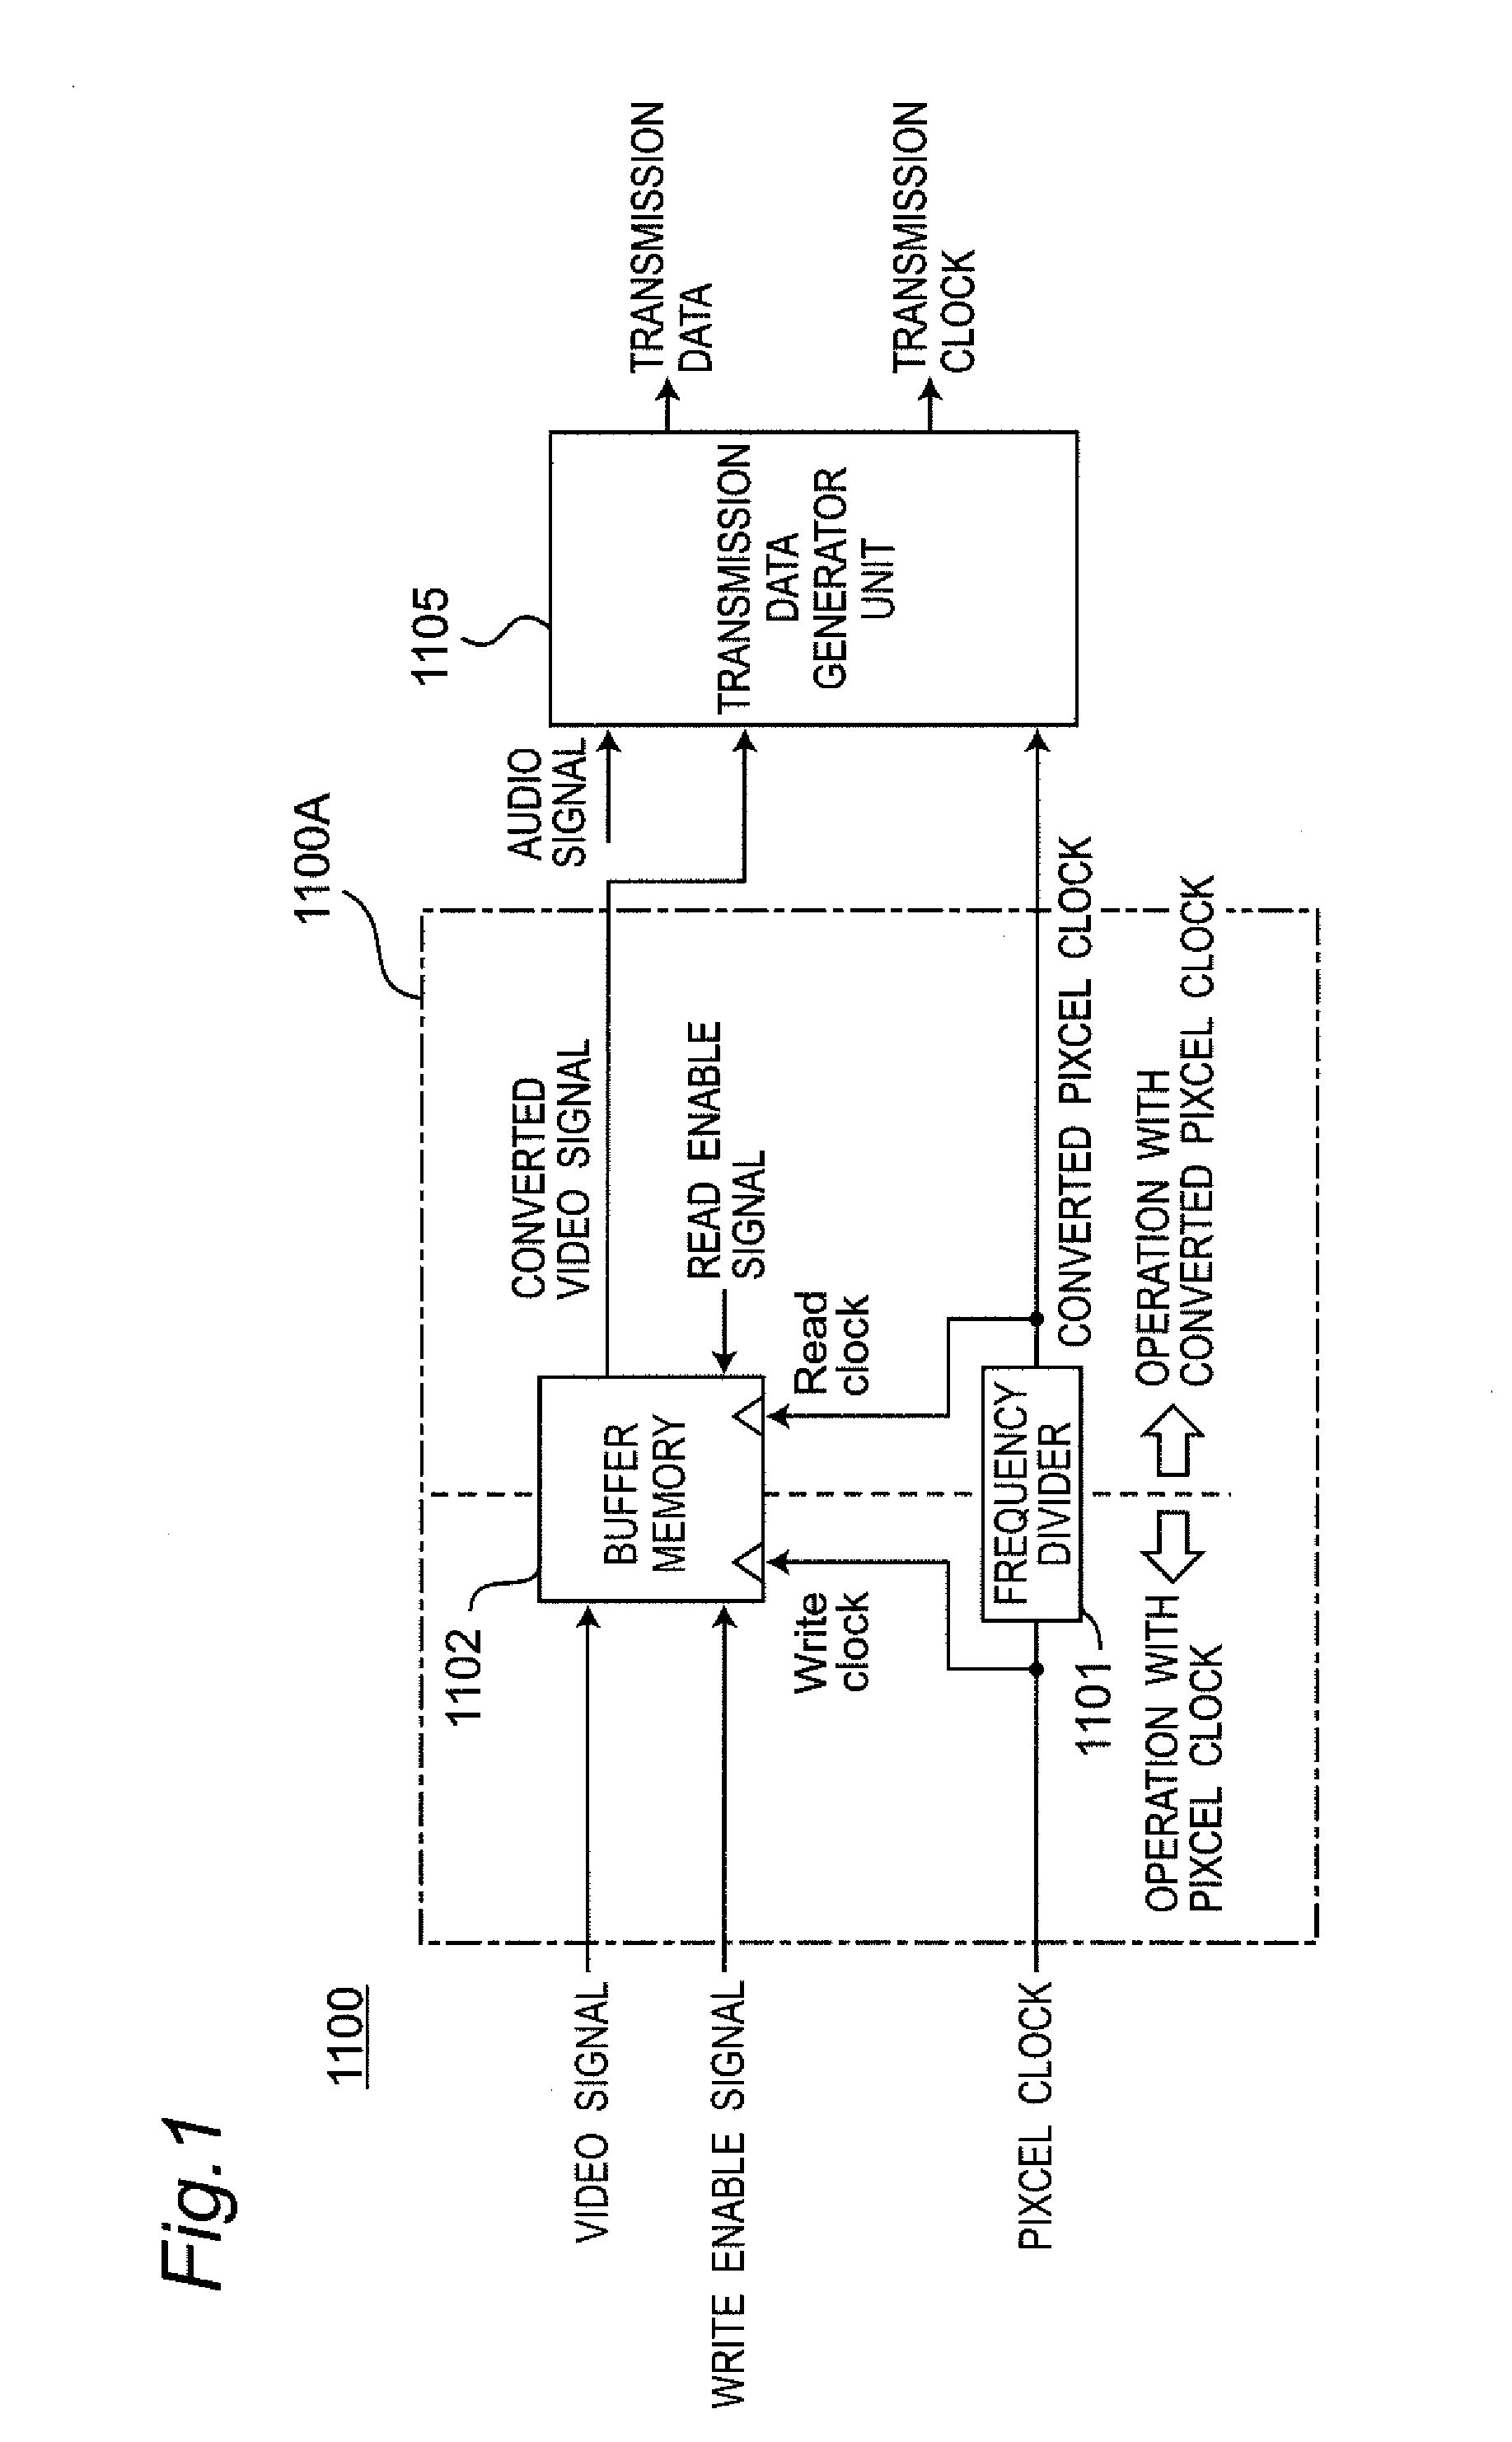 Video signal transmitter apparatus and receiver apparatus using uncompressed transmission system of video signal